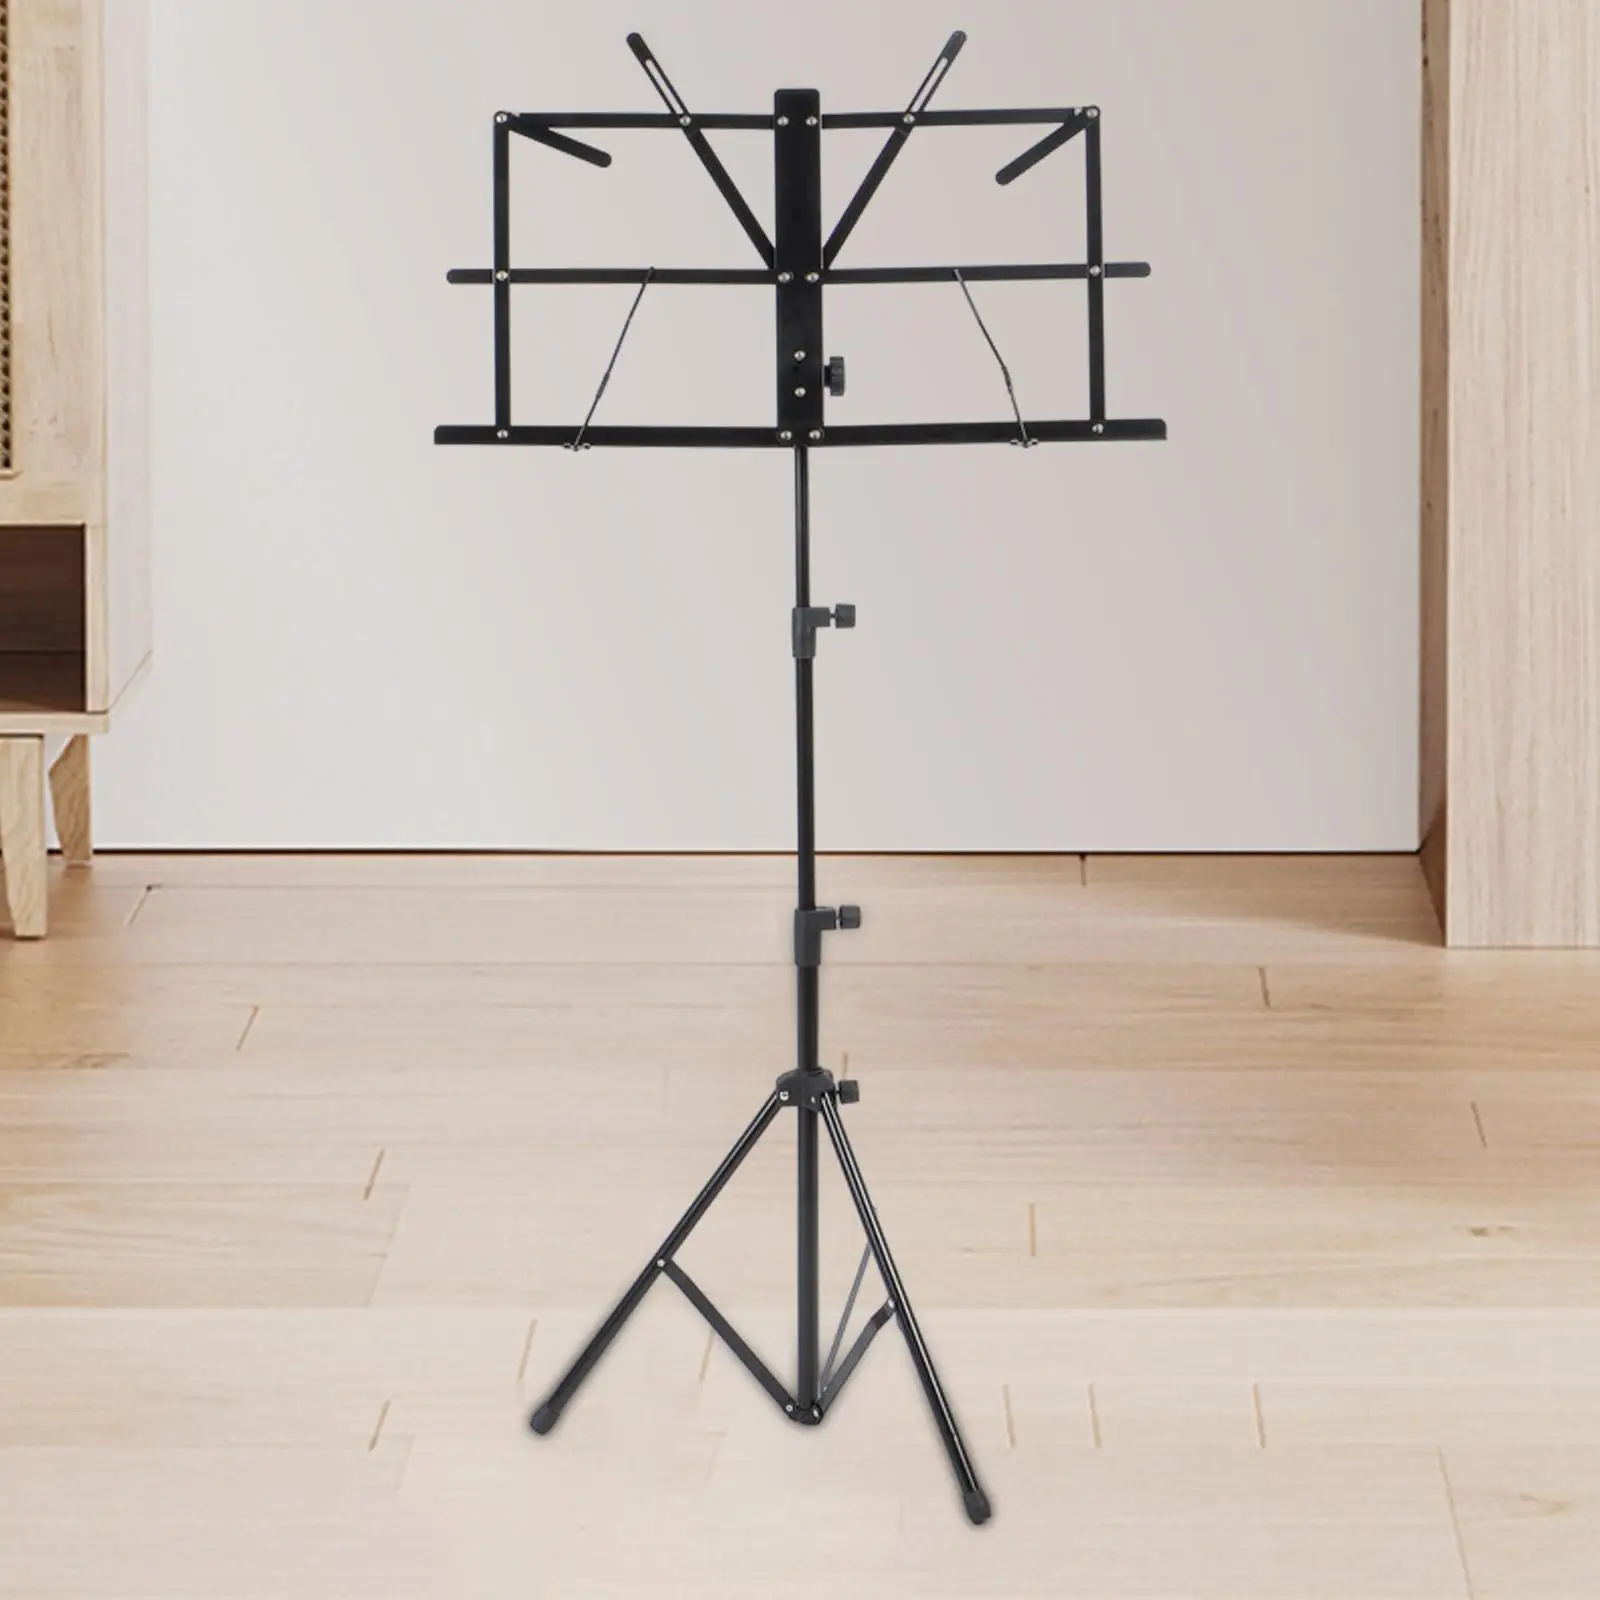 Sheet Music Stand Book Stand, Height Adjustable, Foldable, Professional Music Sheet Clip Holder,